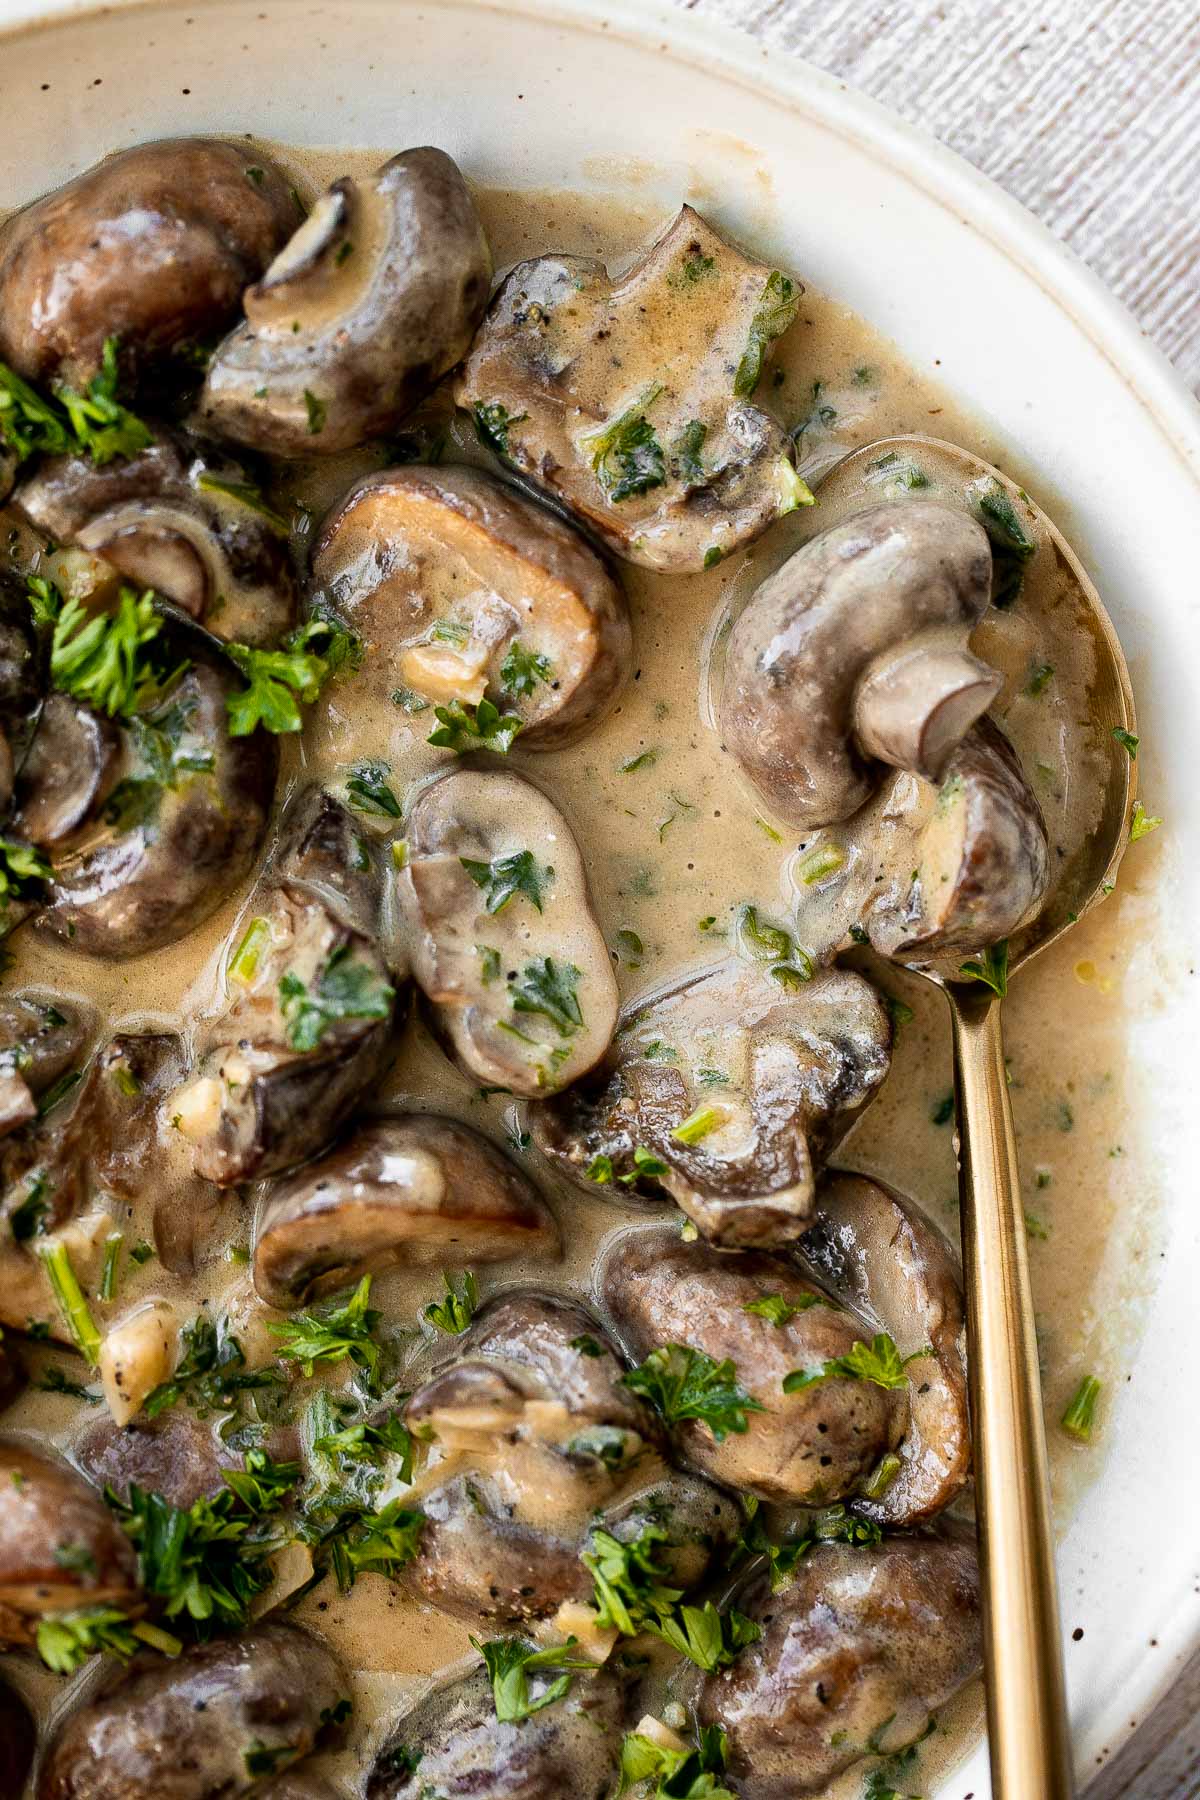 Creamy garlic mushrooms are a simple, delicious, and easy side dish. This comforting family favorite that is quick and easy to make in just 15 minutes. | aheadofthyme.com